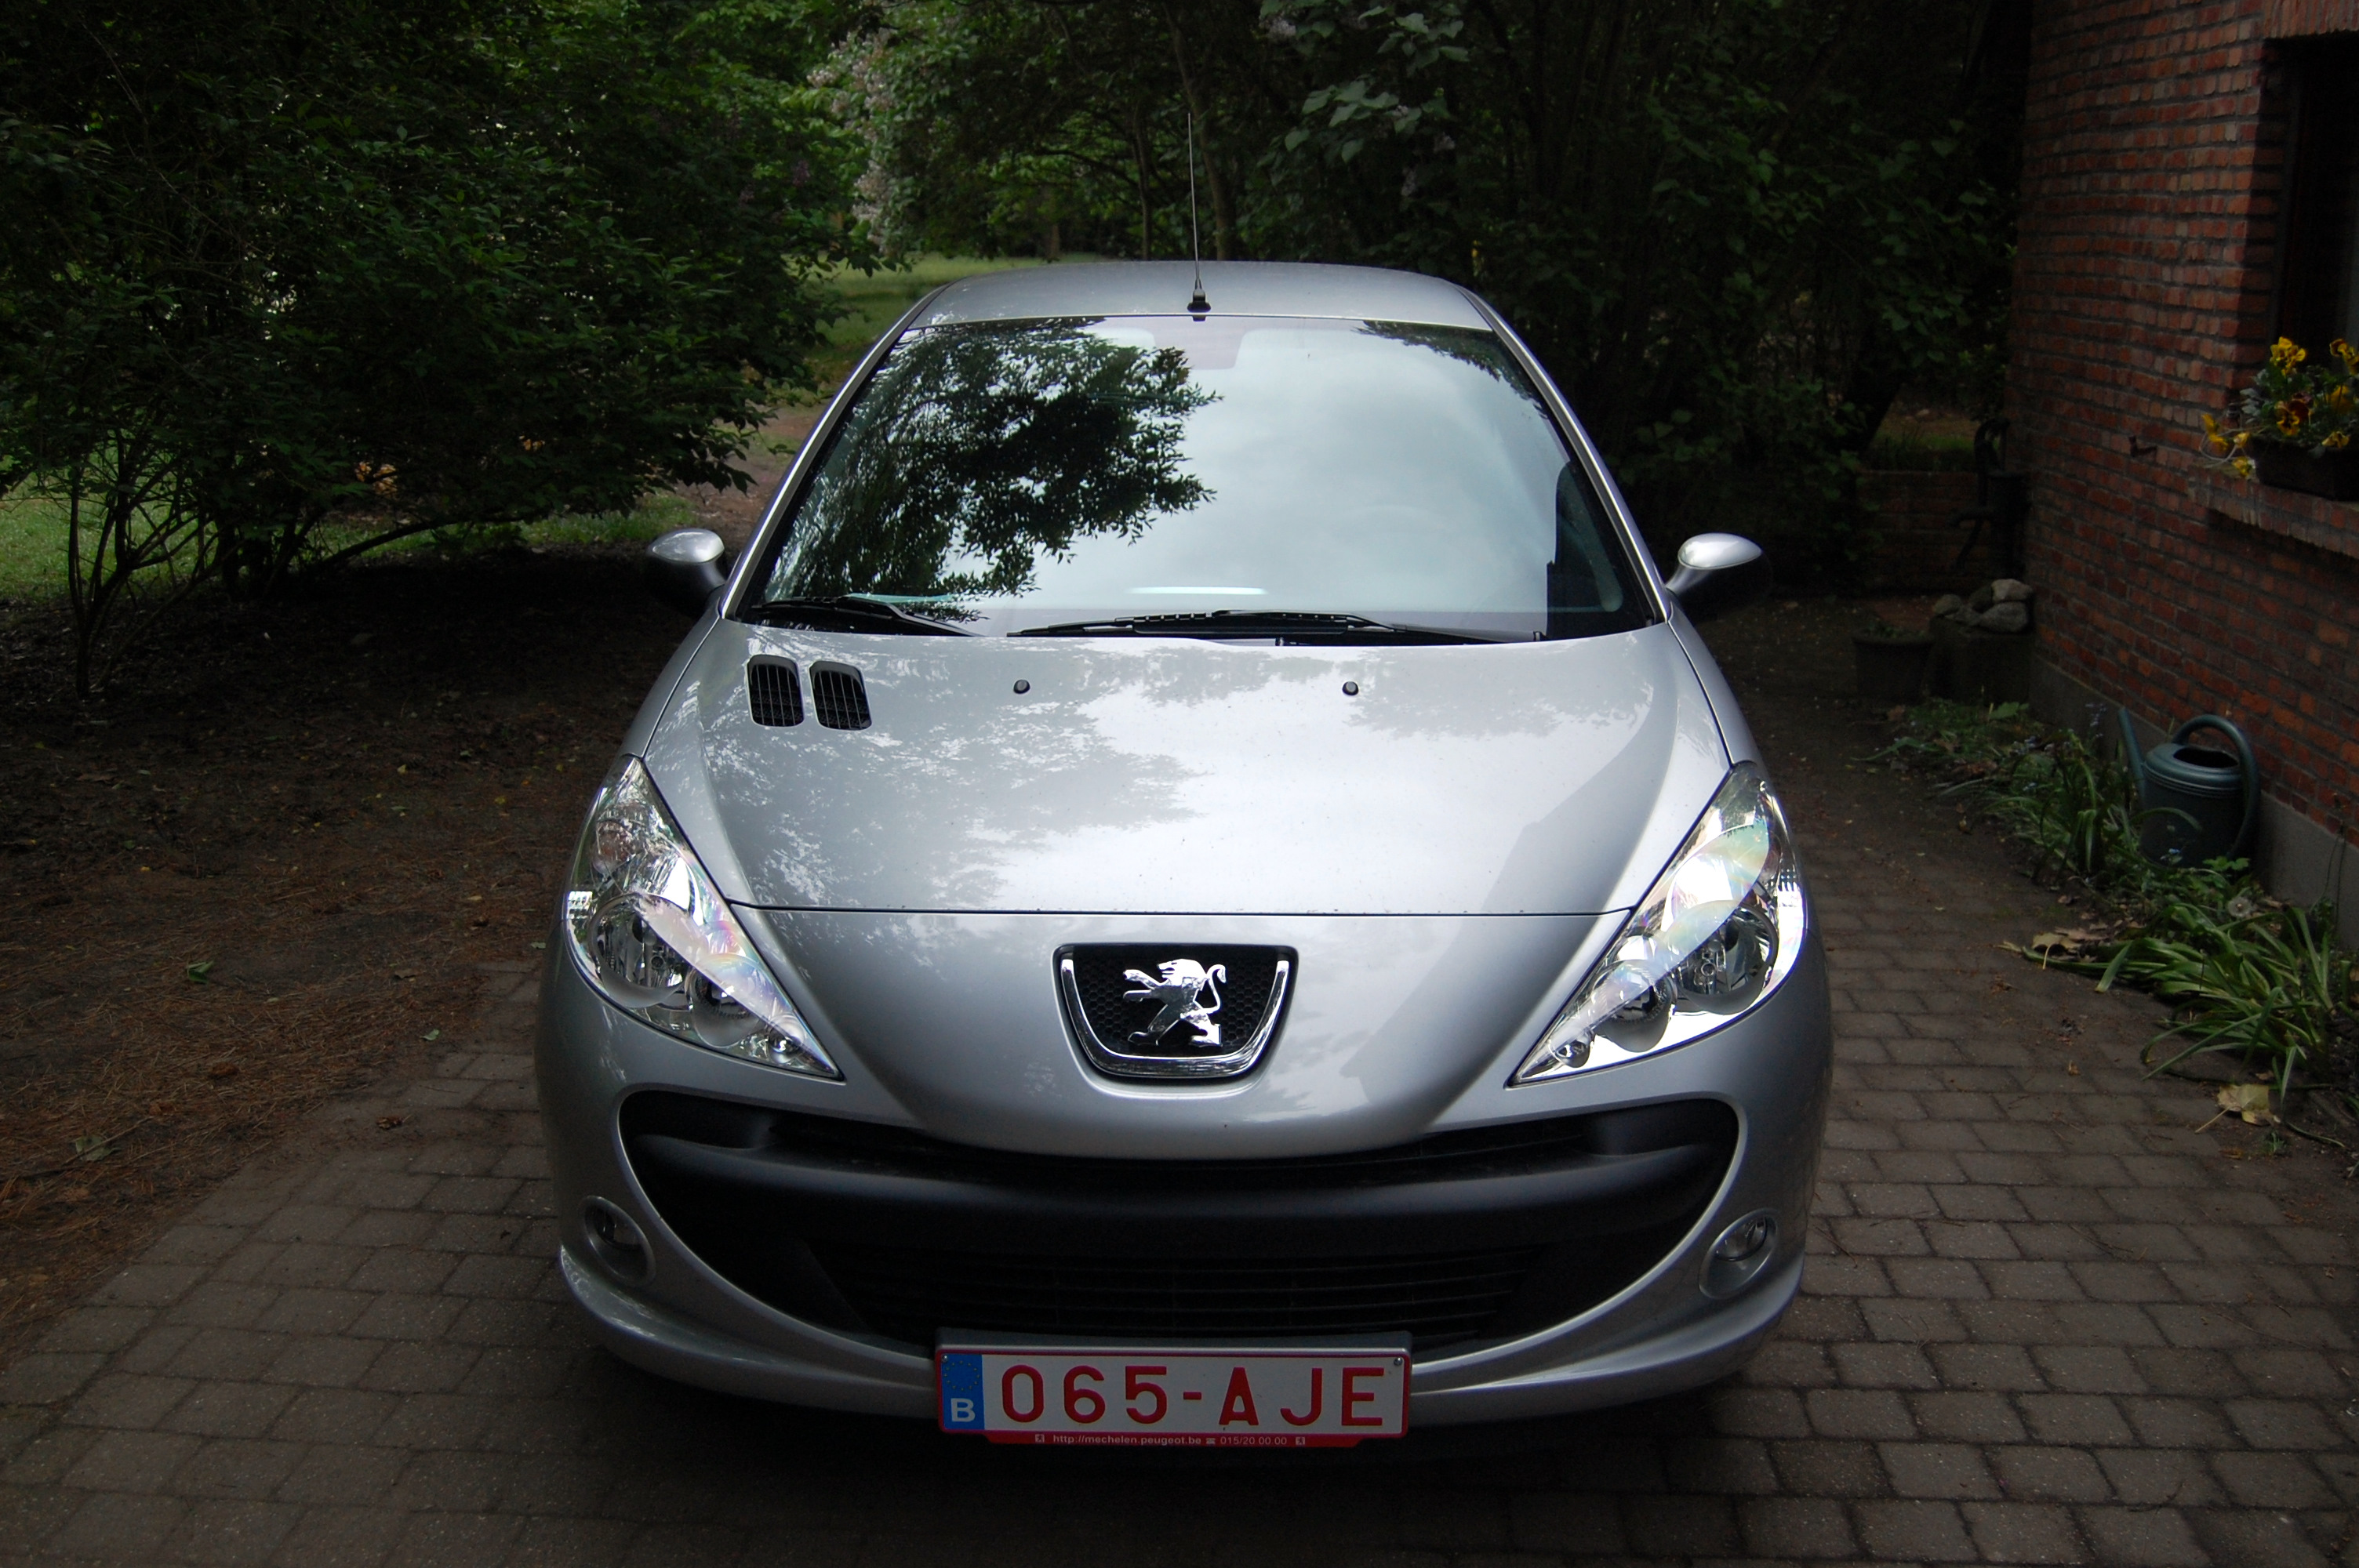 Category:Peugeot 207 Compact - Wikimedia Commons